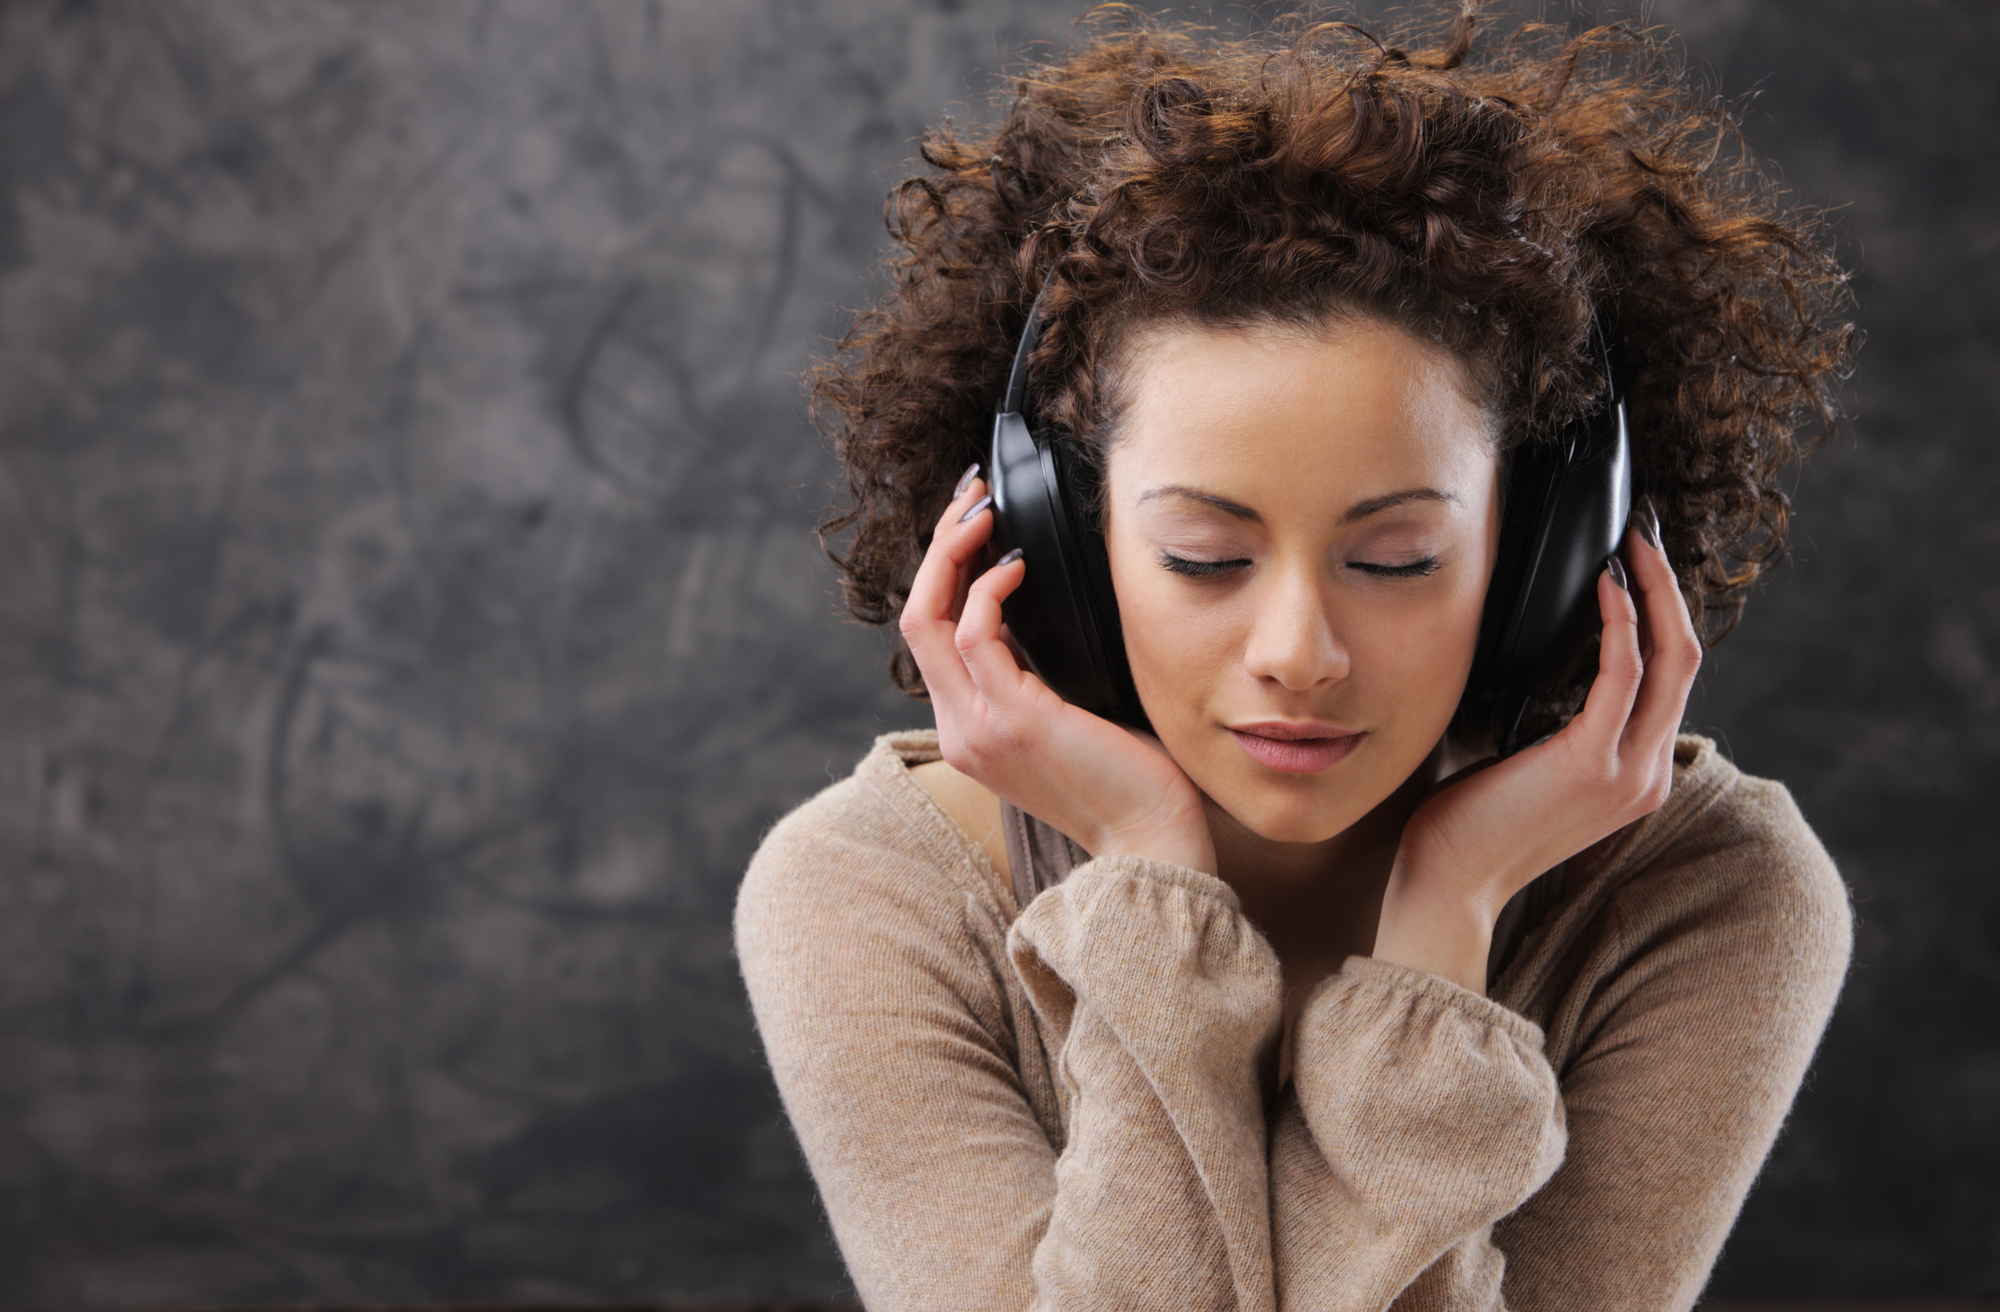 a woman with her eyes closed listening to something with headphones